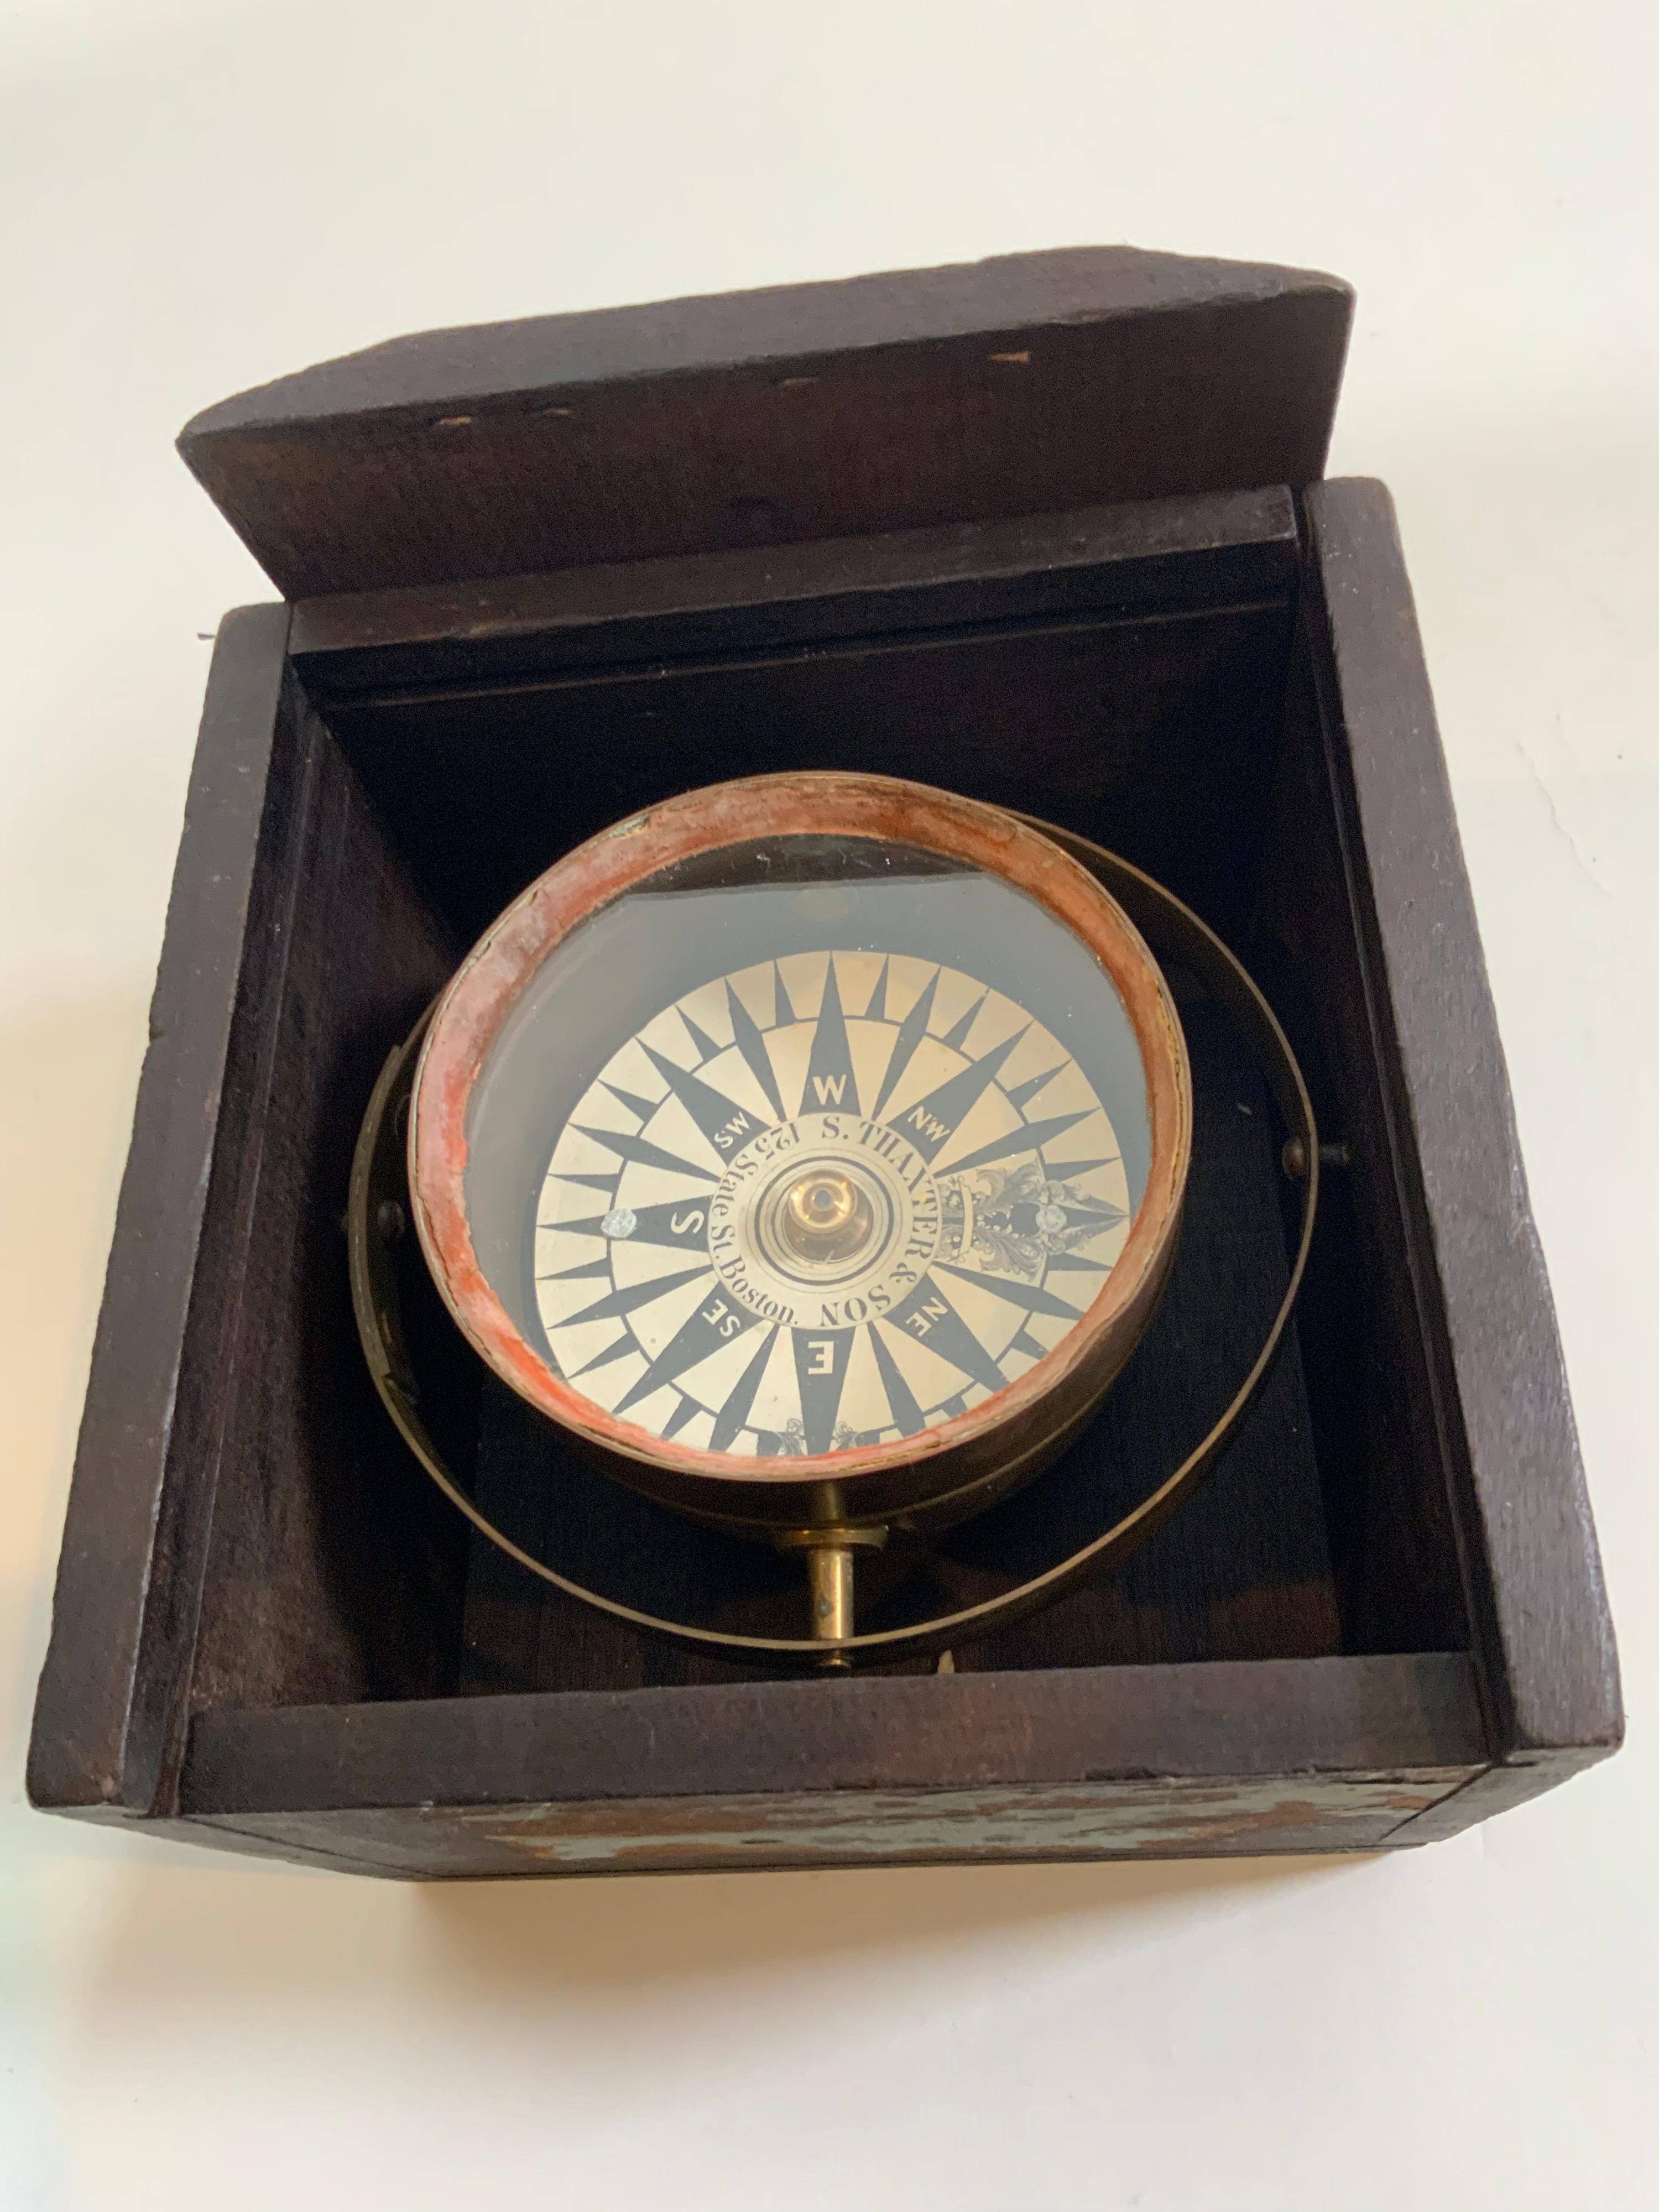 Nineteenth century solid brass gimballed boat compass with varnished wood box. Compass card is marked with maker's name Ritchie and sold by S. Thaxter and Sons of Boston, Massachusetts. Circa 1880.

Overall Dimensions: 5